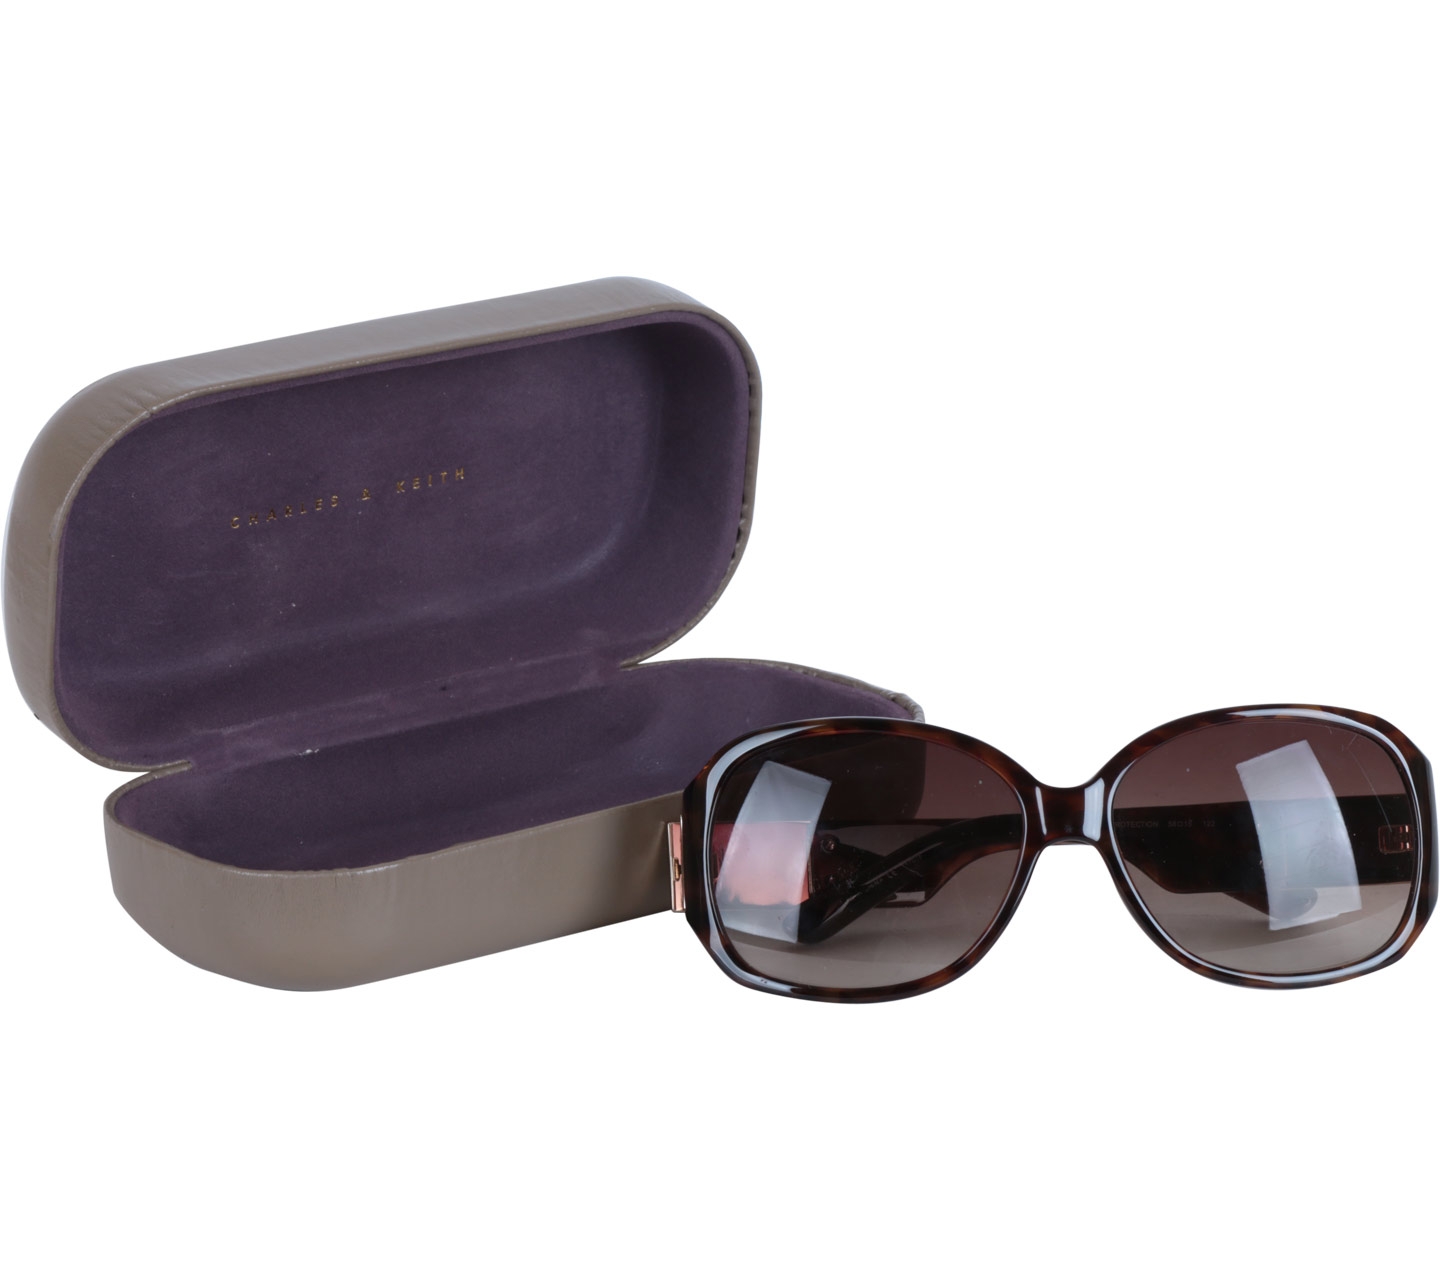 Charles and Keith Brown Tortoise Sunglasses